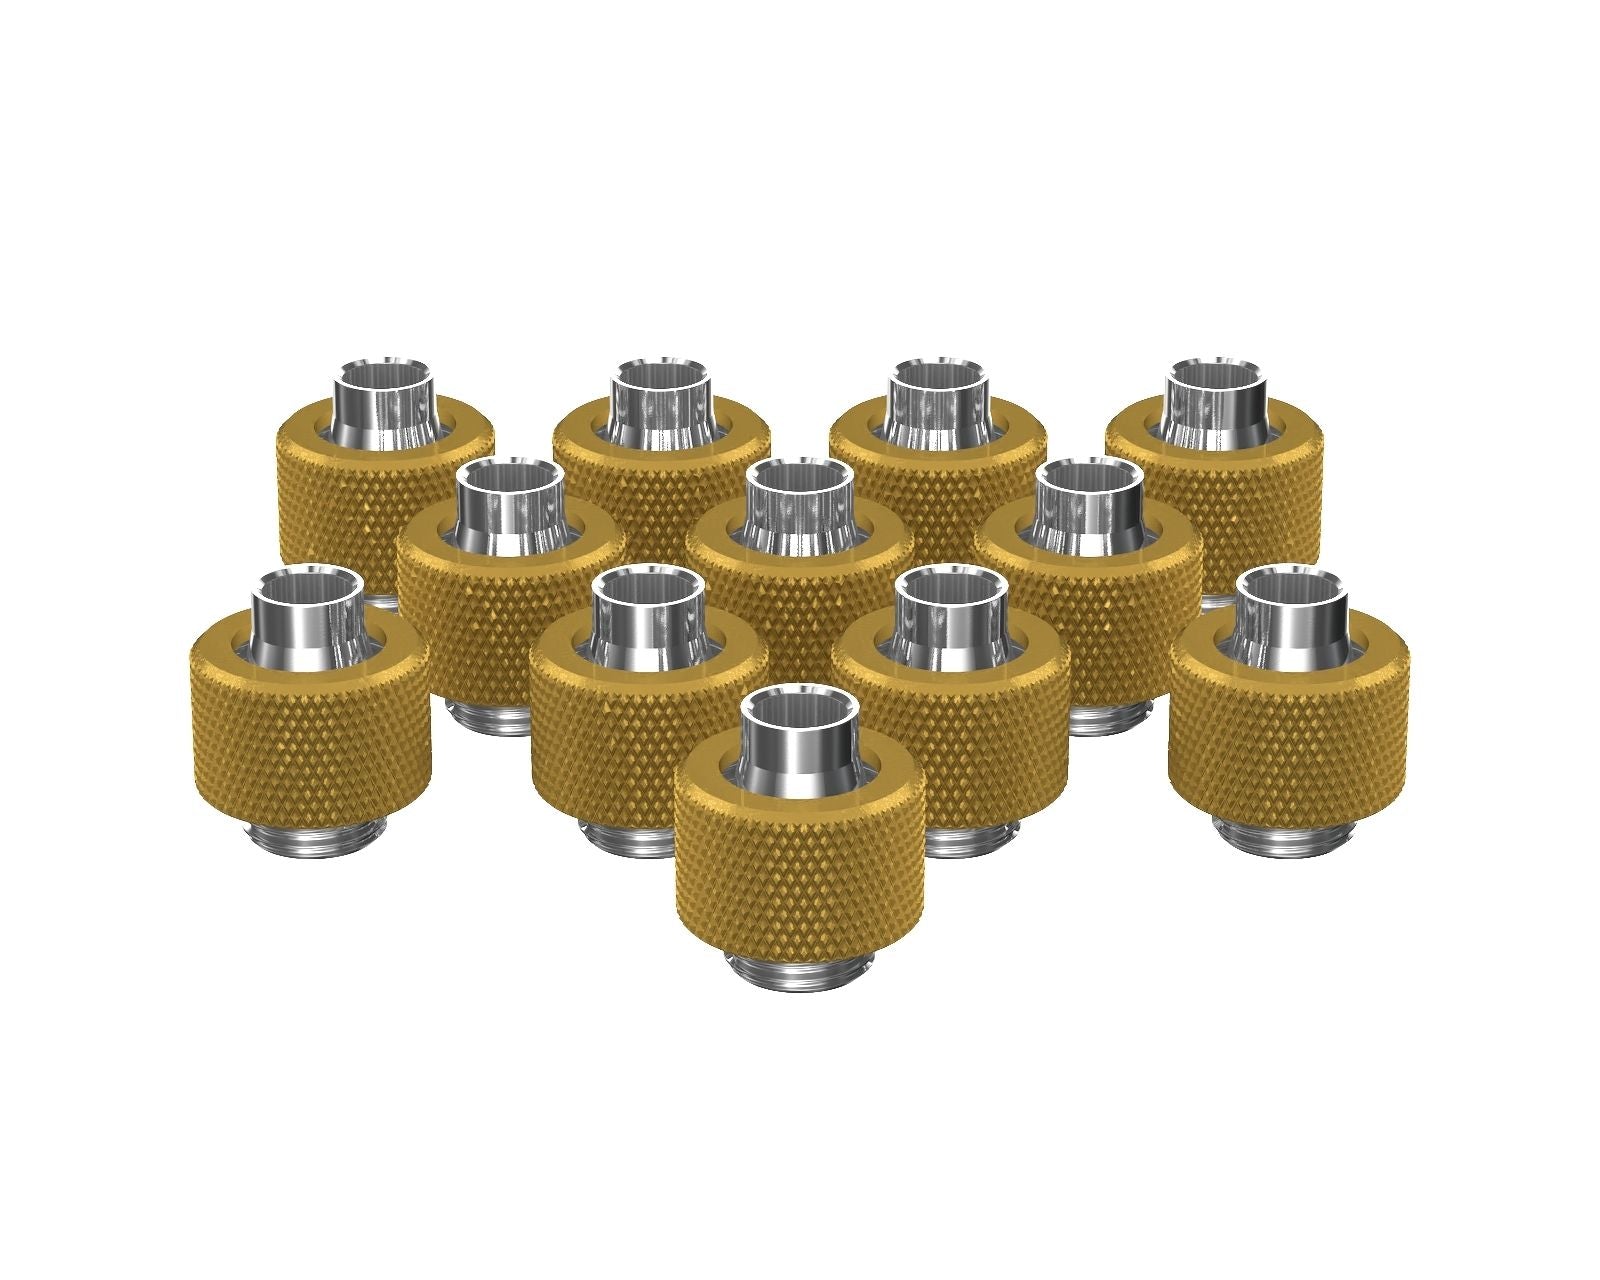 PrimoChill SecureFit SX - Premium Compression Fitting For 3/8in ID x 1/2in OD Flexible Tubing 12 Pack (F-SFSX12-12) - Available in 20+ Colors, Custom Watercooling Loop Ready - Gold